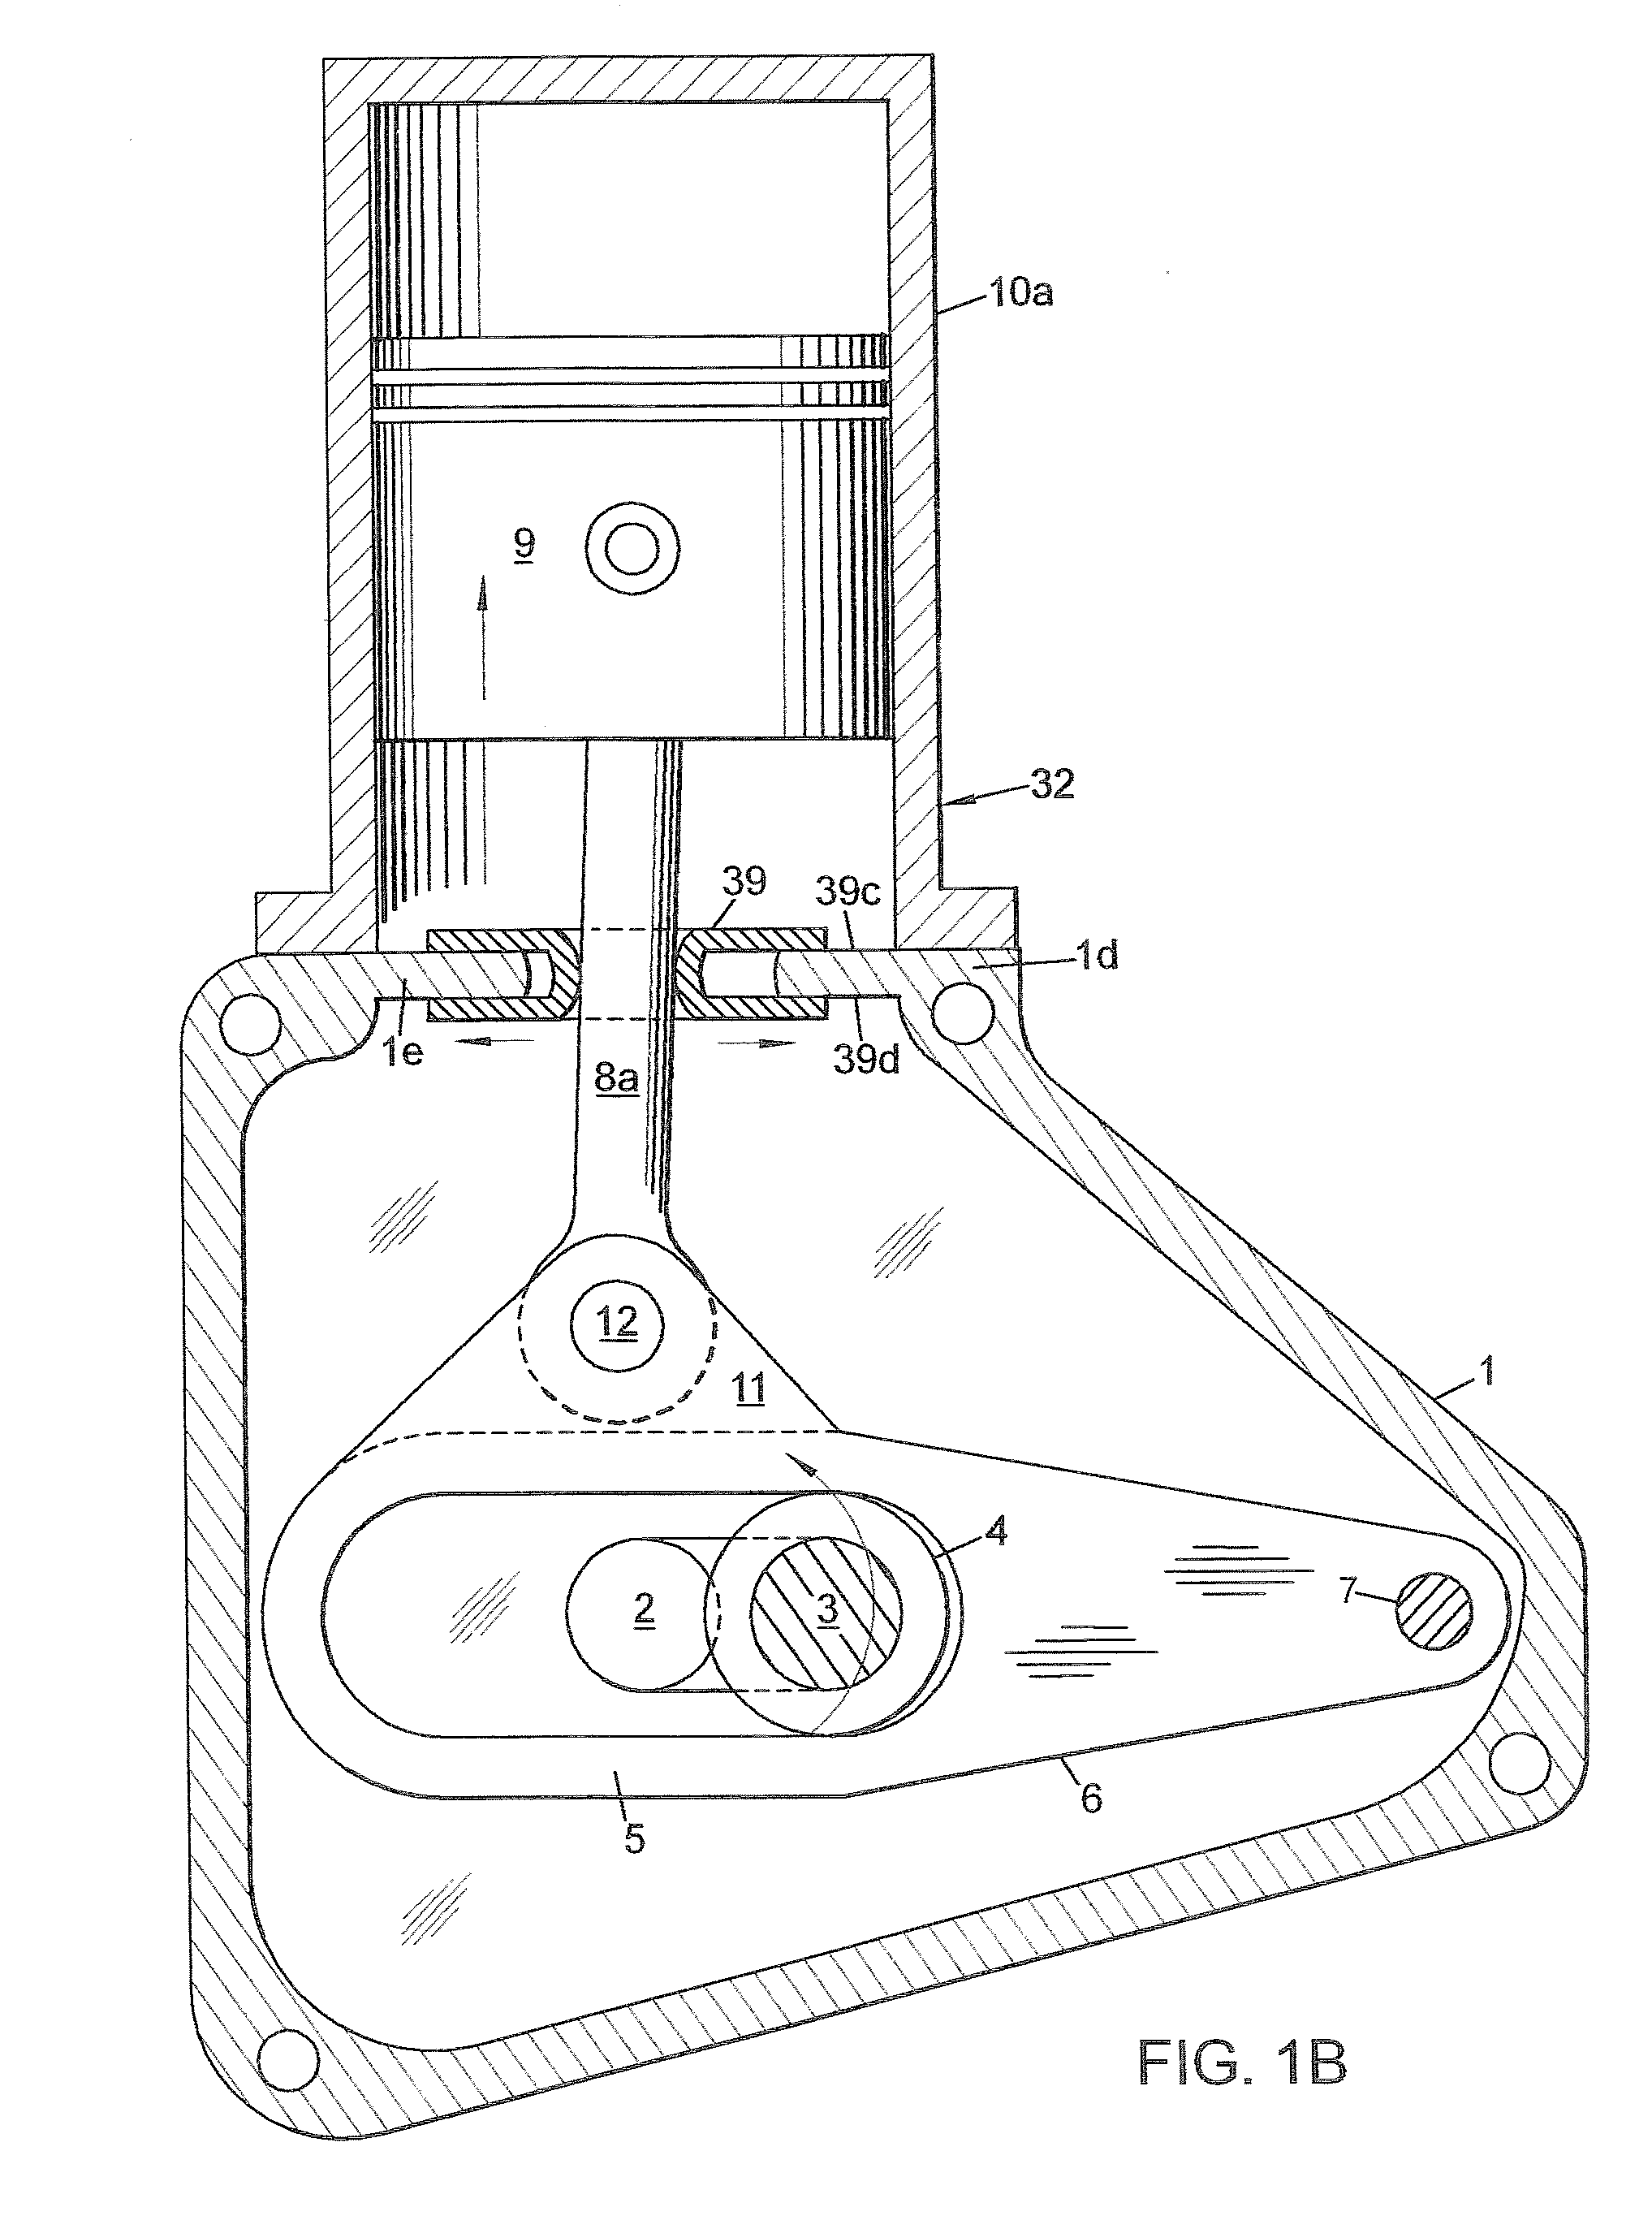 Self-Aspirated Reciprocating Internal Combustion Engine